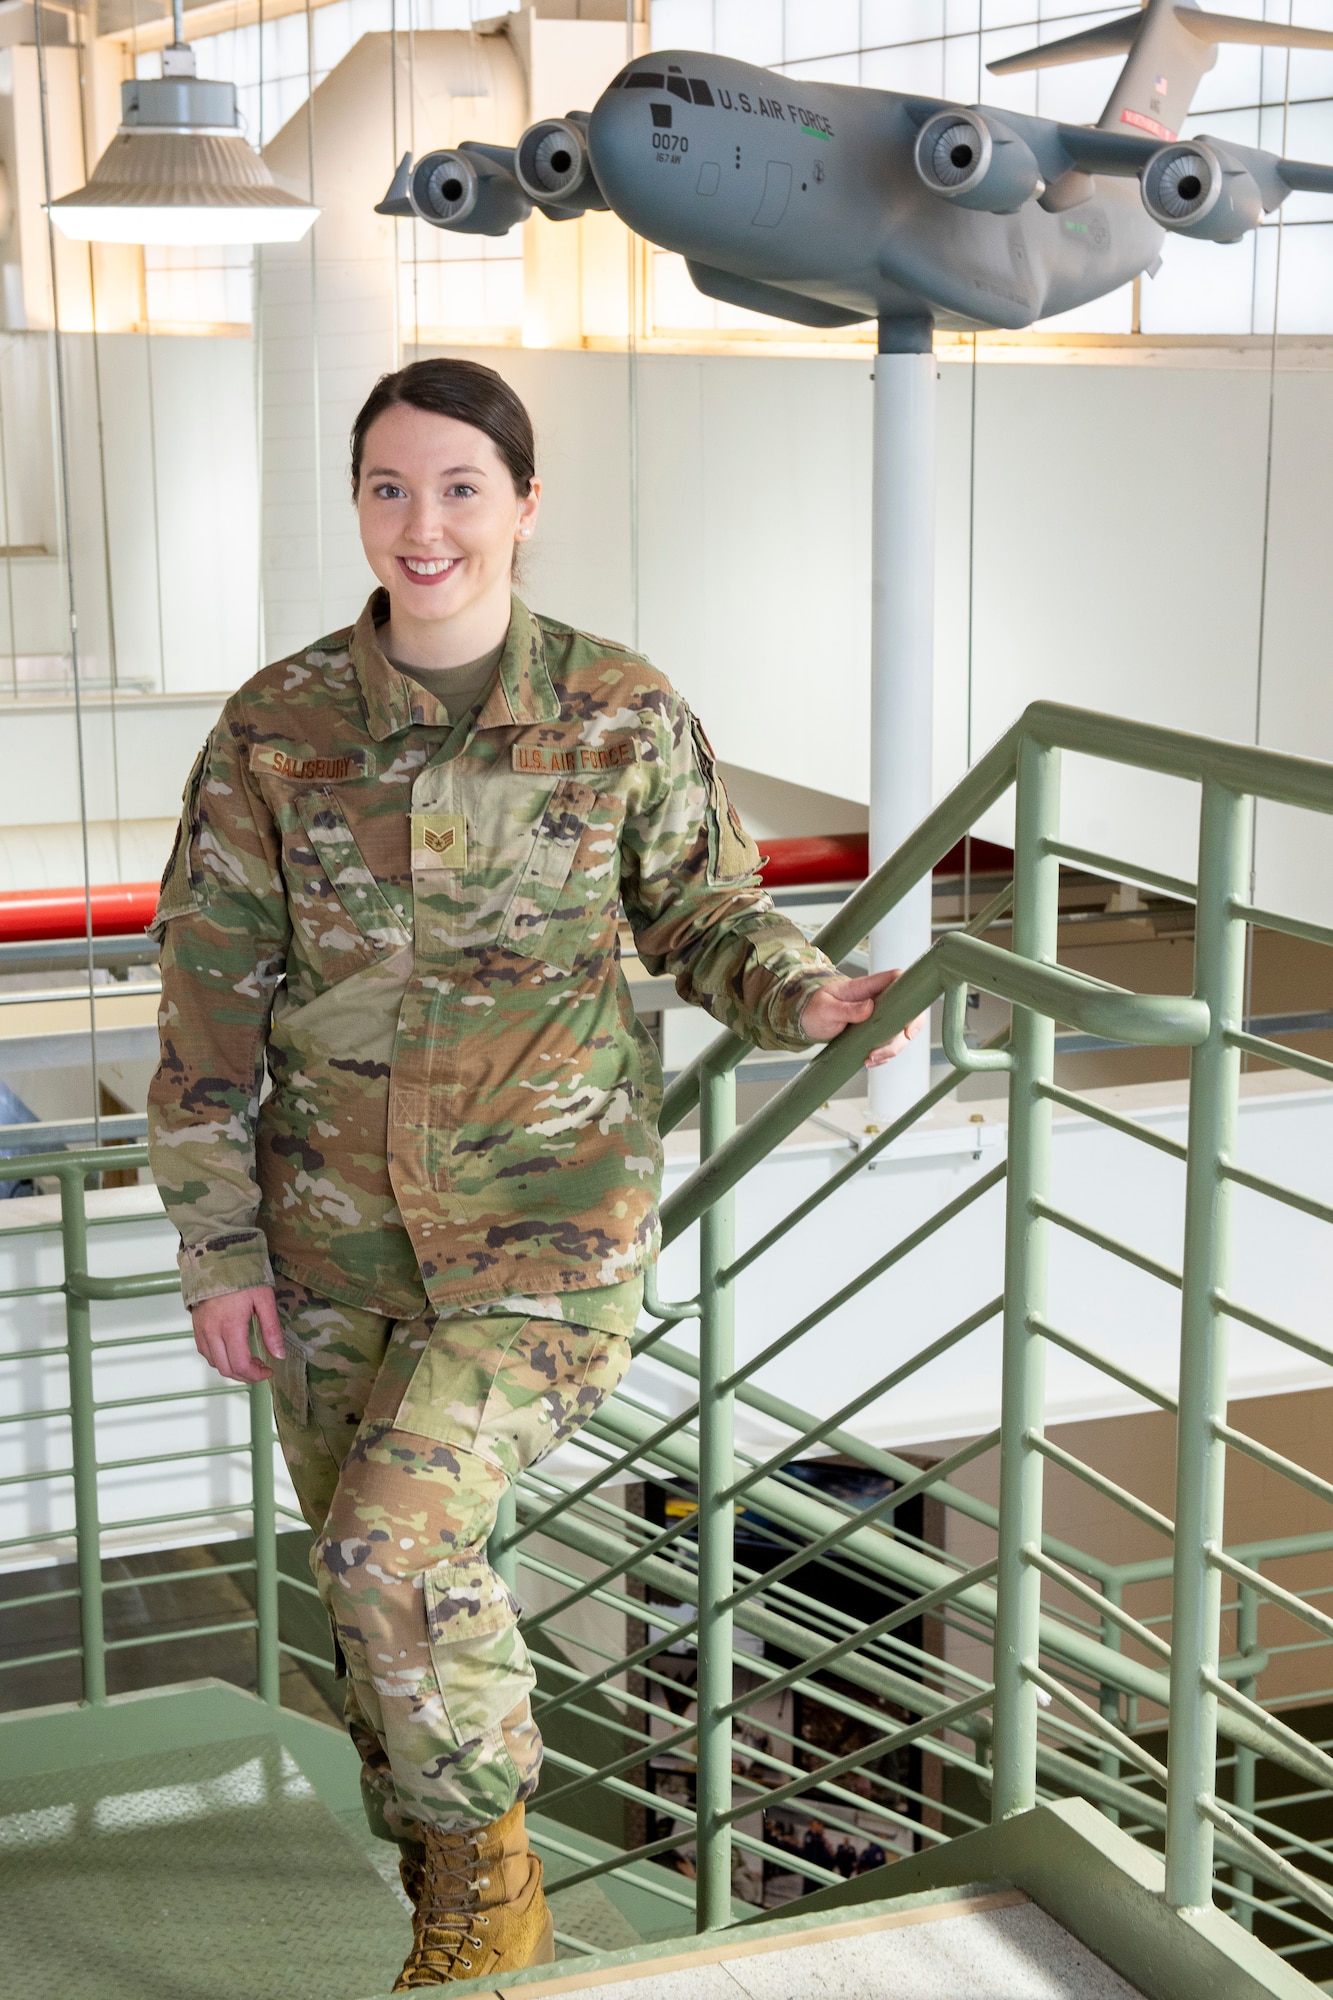 Staff Sgt. Whitney Salisbury is a maintenance production manager for the 167th Maintenance Group and the 167th Airlift Wing Airman Spotlight for April 2022.